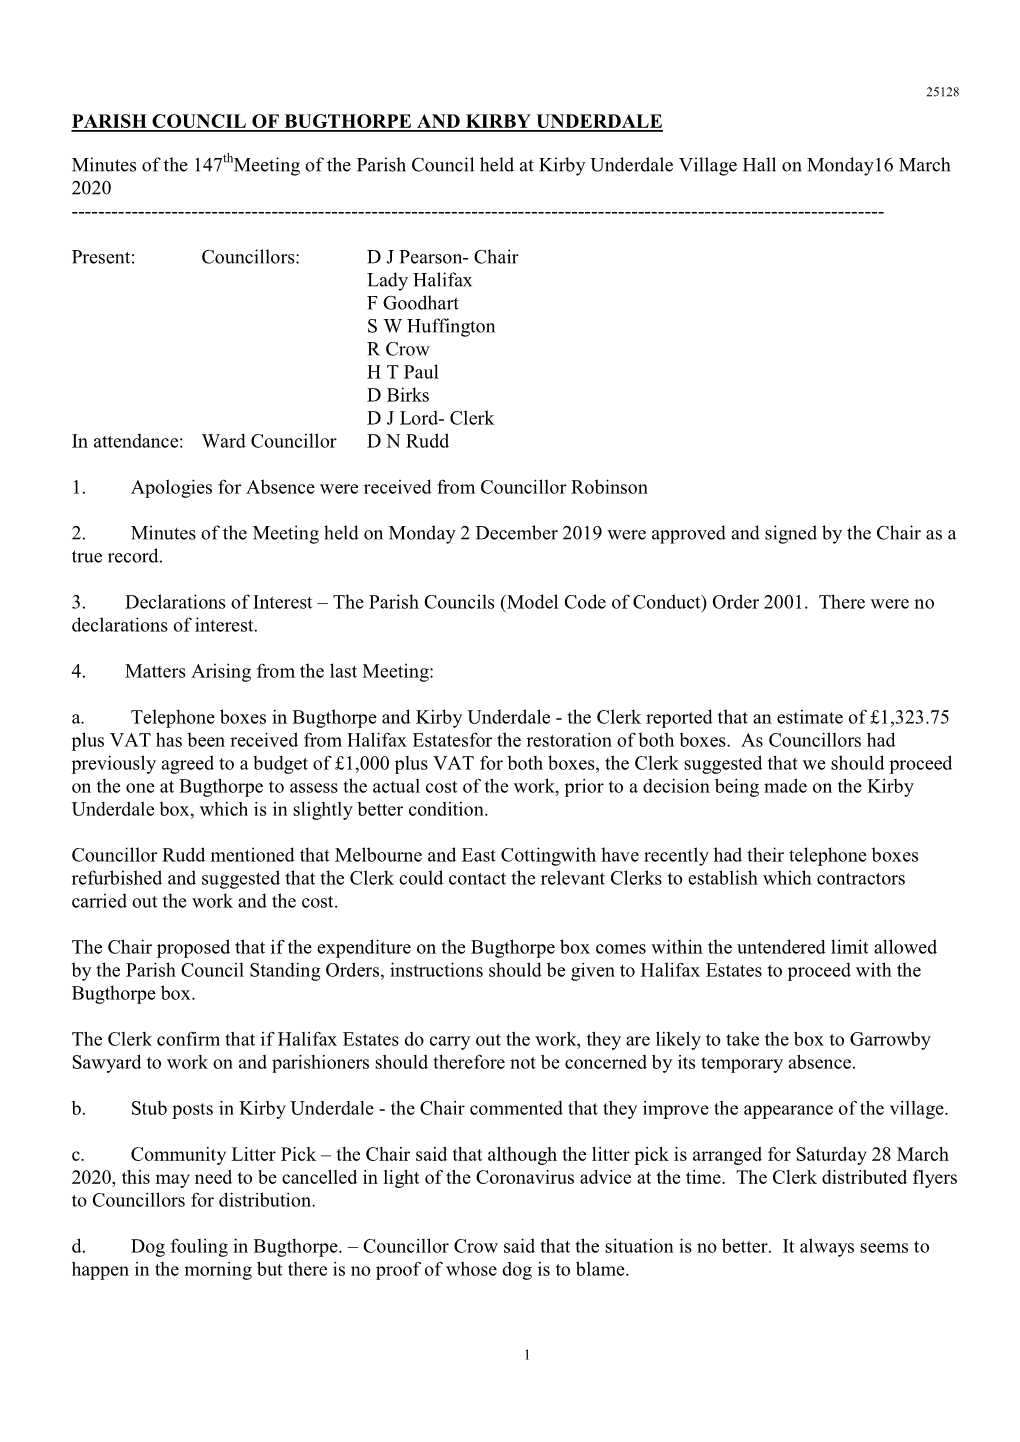 PARISH COUNCIL of BUGTHORPE and KIRBY UNDERDALE Minutes